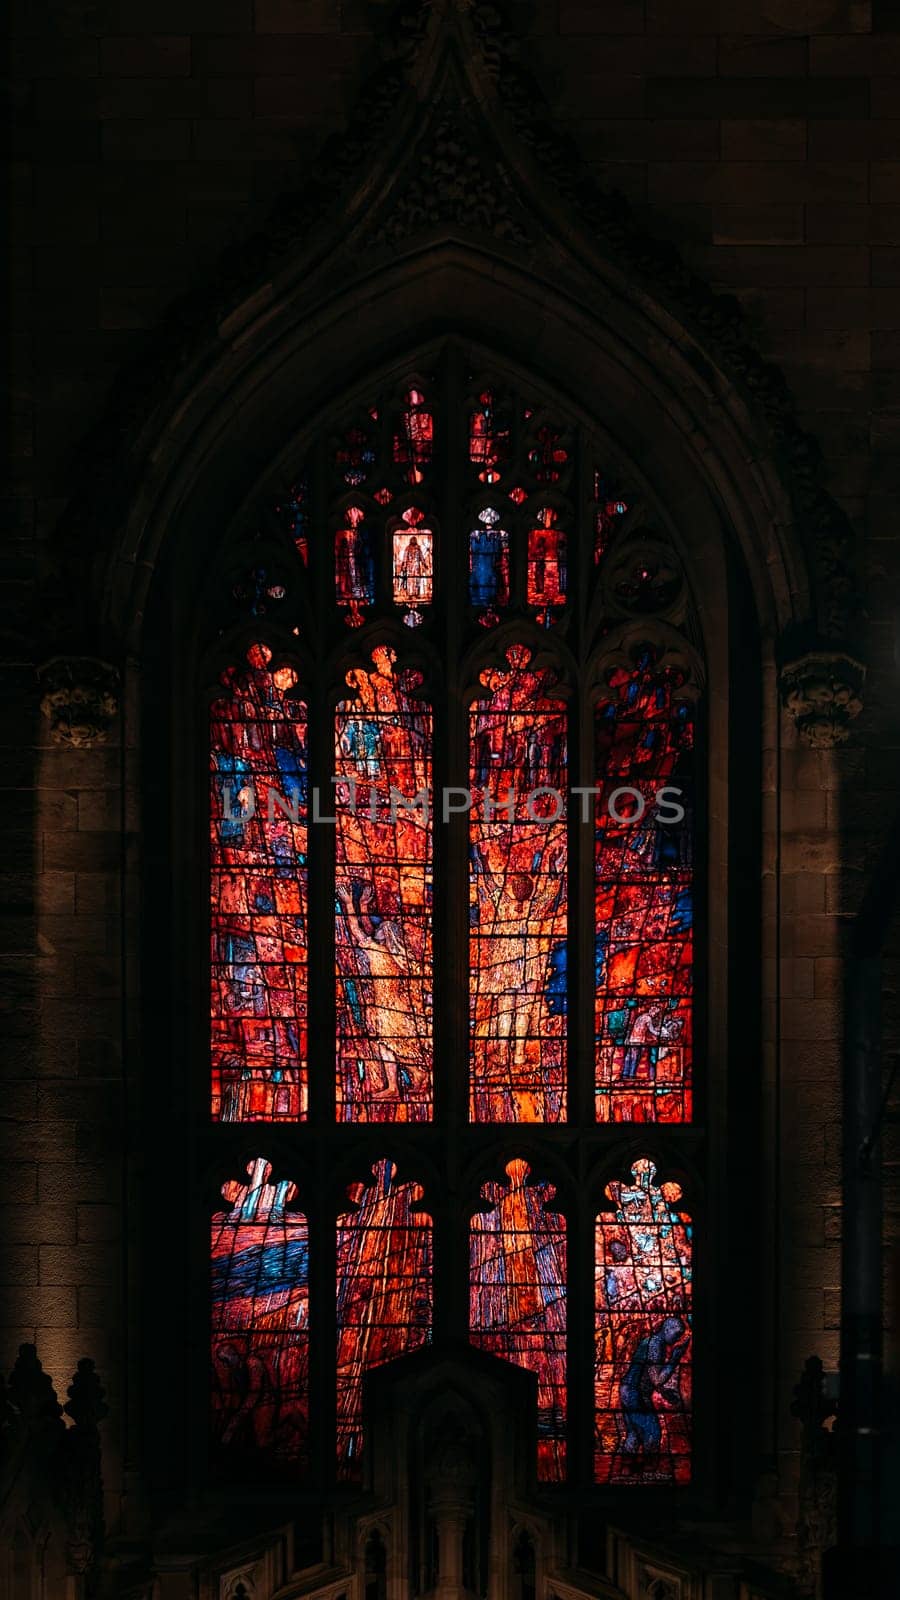 Vivid Stained Glass Window Artwork in a New York Church by apavlin